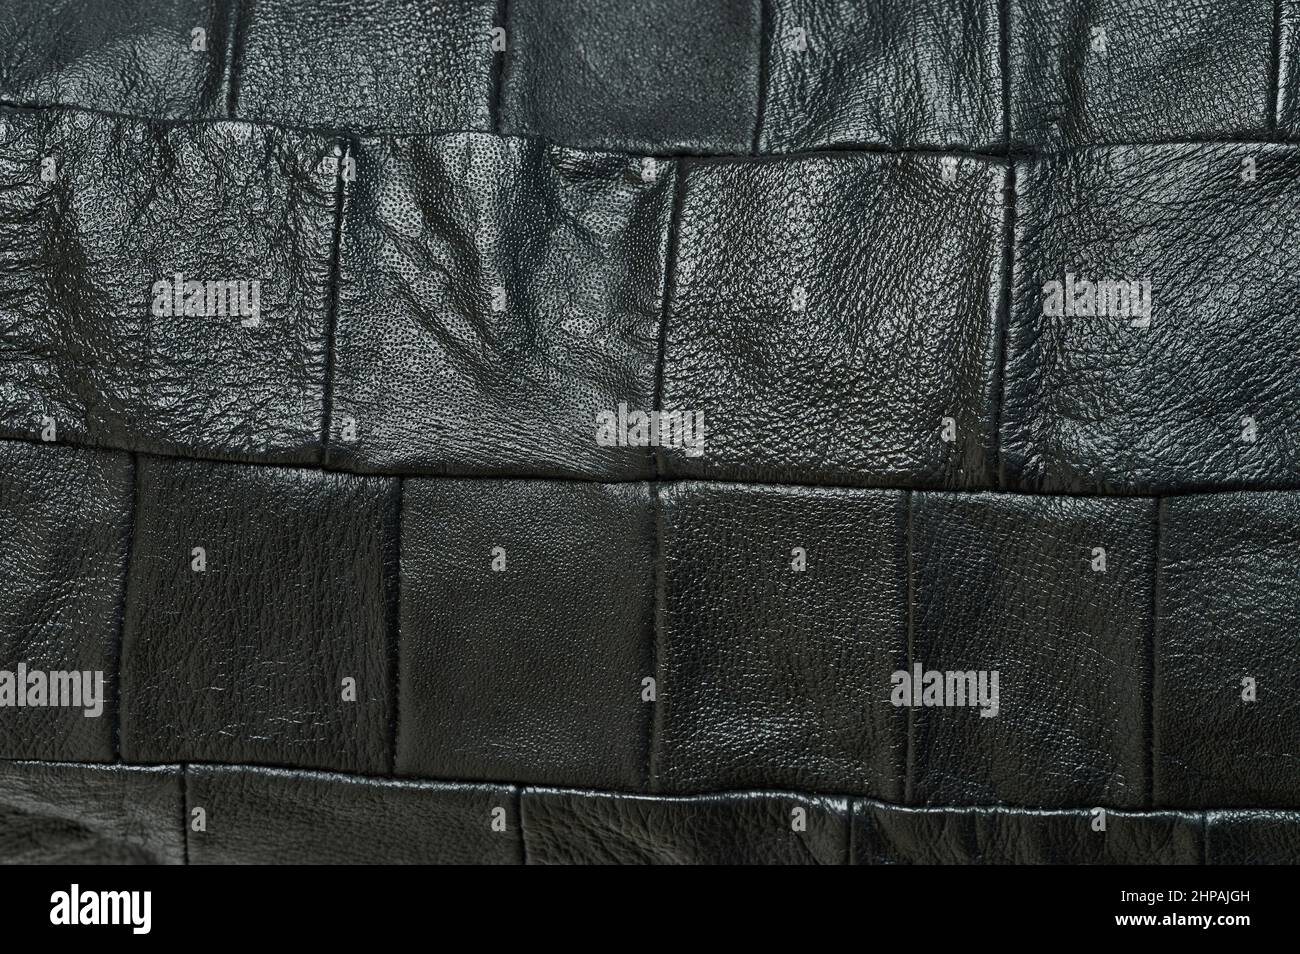 Dark leather square patch material background pattern Stock Photo